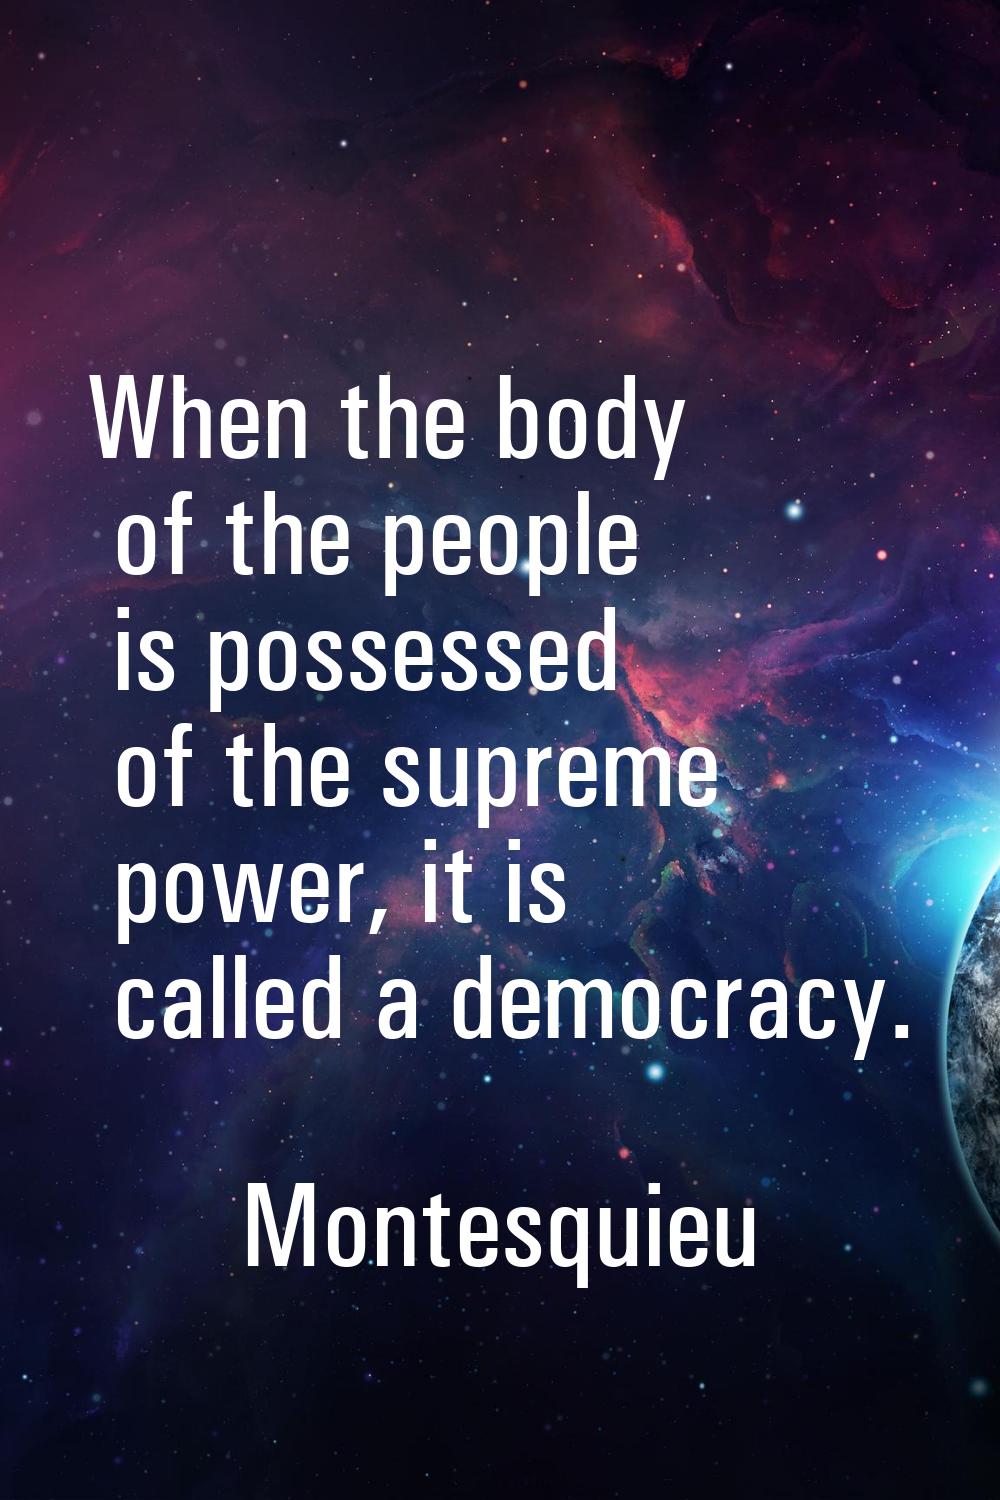 When the body of the people is possessed of the supreme power, it is called a democracy.